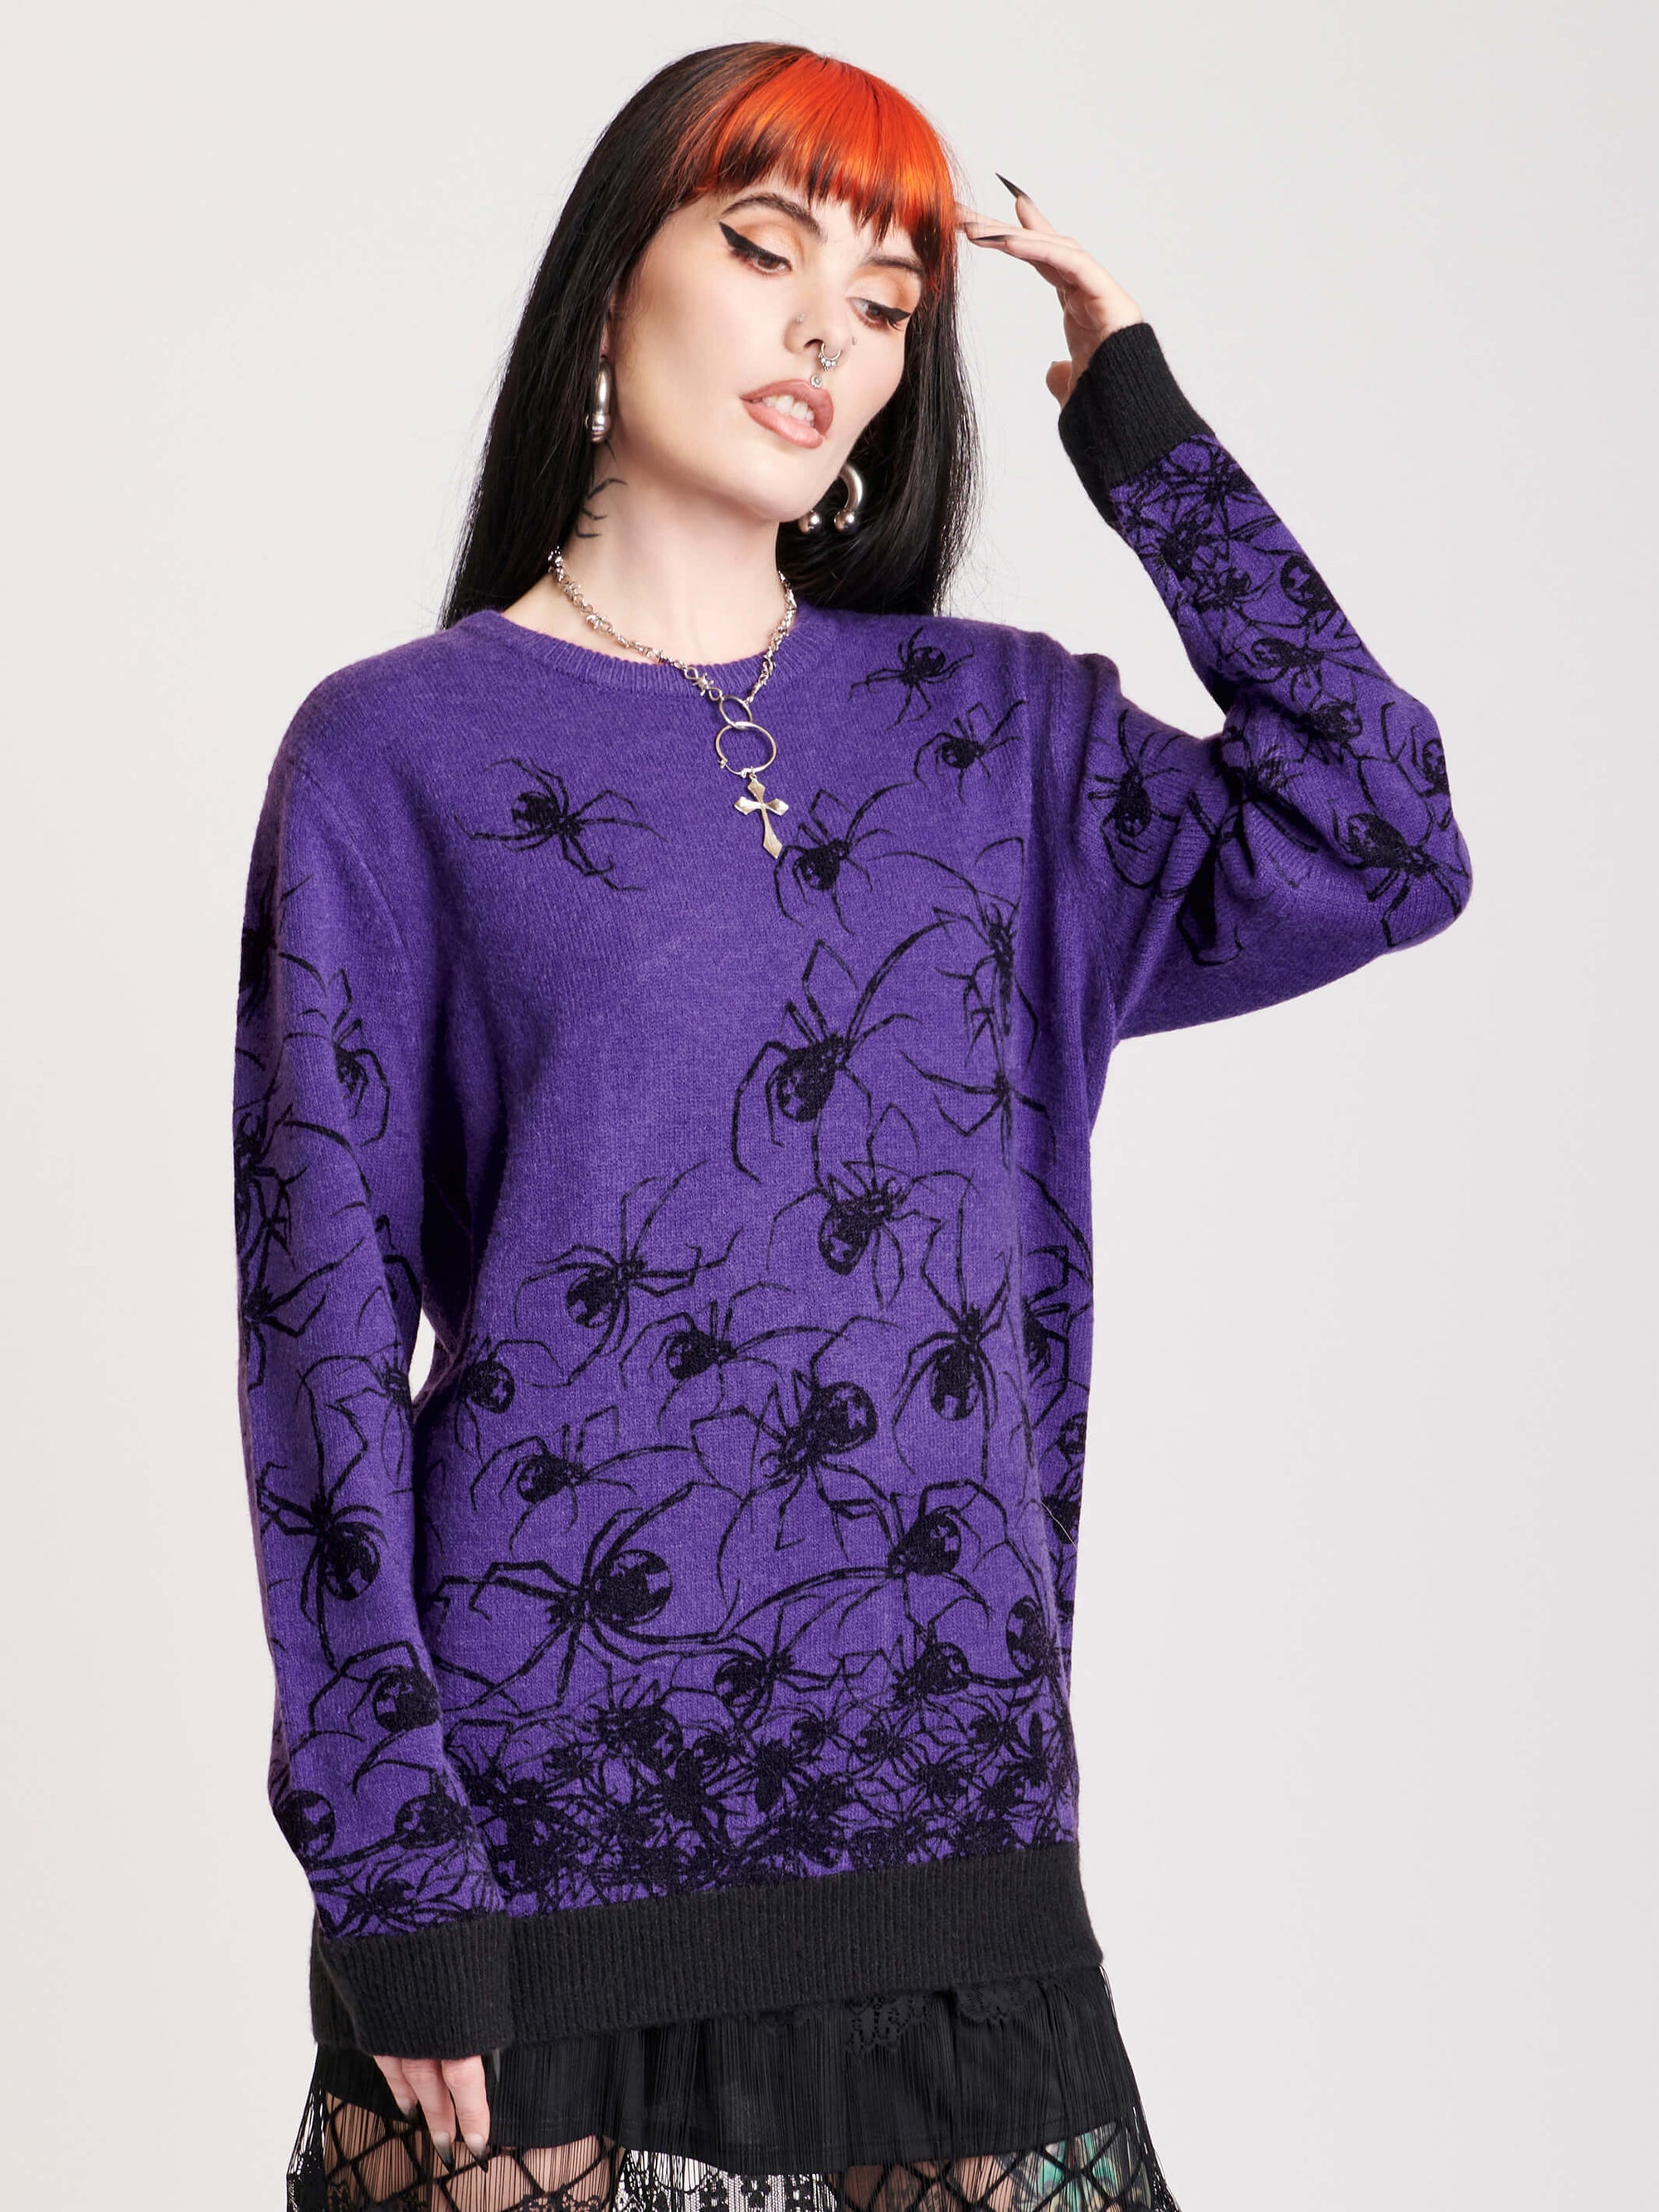 purple and black spider sweater